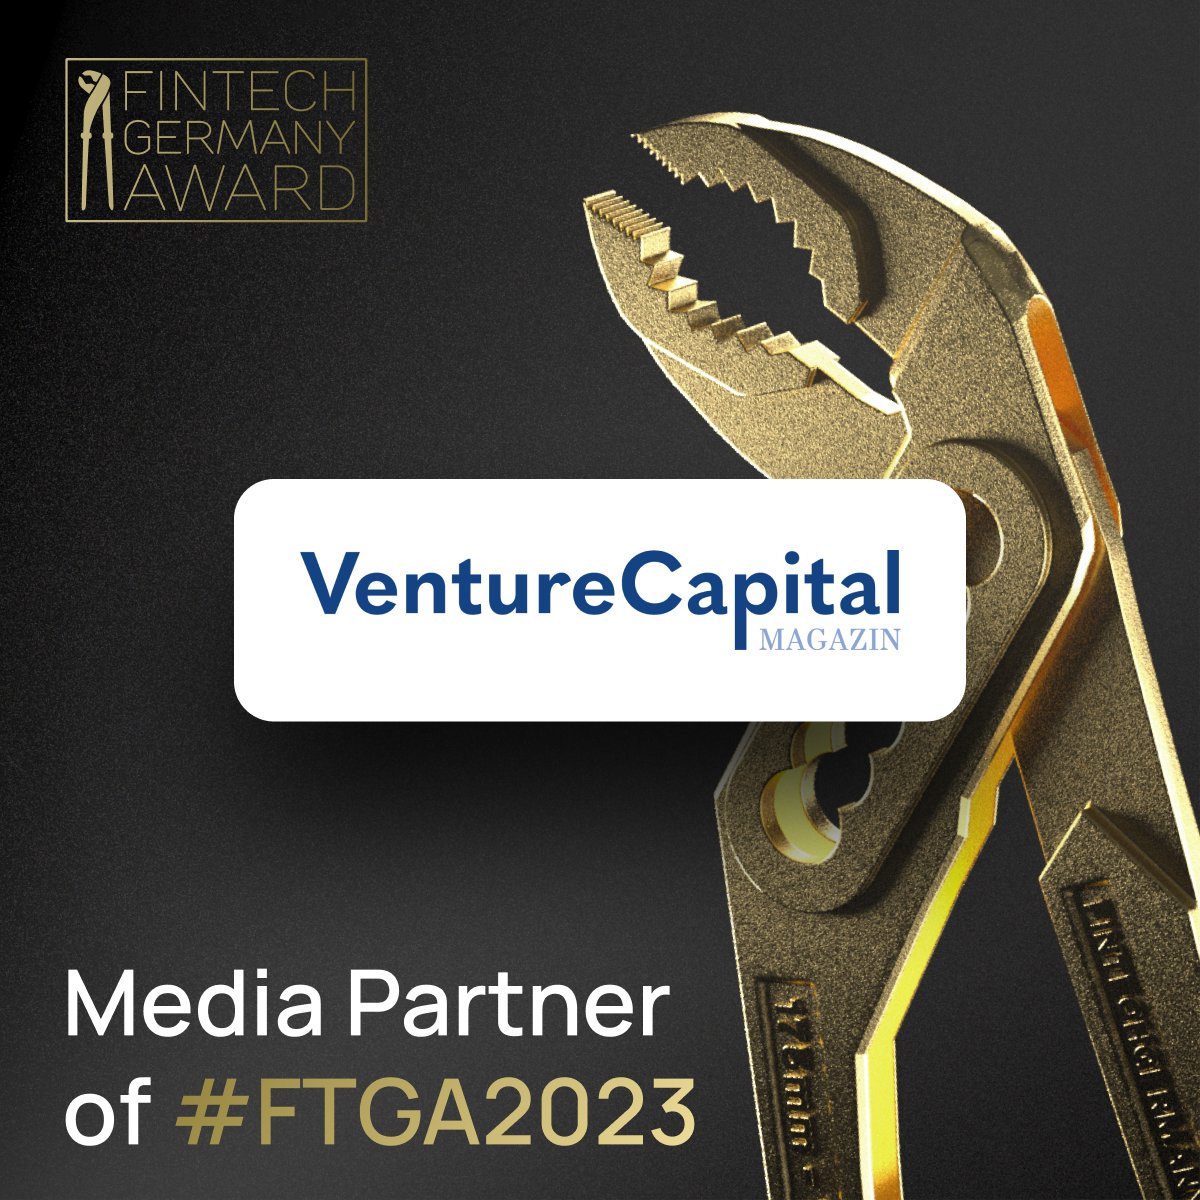 We are delighted to share the news that @vc_magazin has joined us as a media partner for. With their support, we have the opportunity to celebrate and spotlight the exceptional startups that are reshaping the financial landscape.

#FTGA #FTGA2023 #Scaleups #venturecapital #Awards…